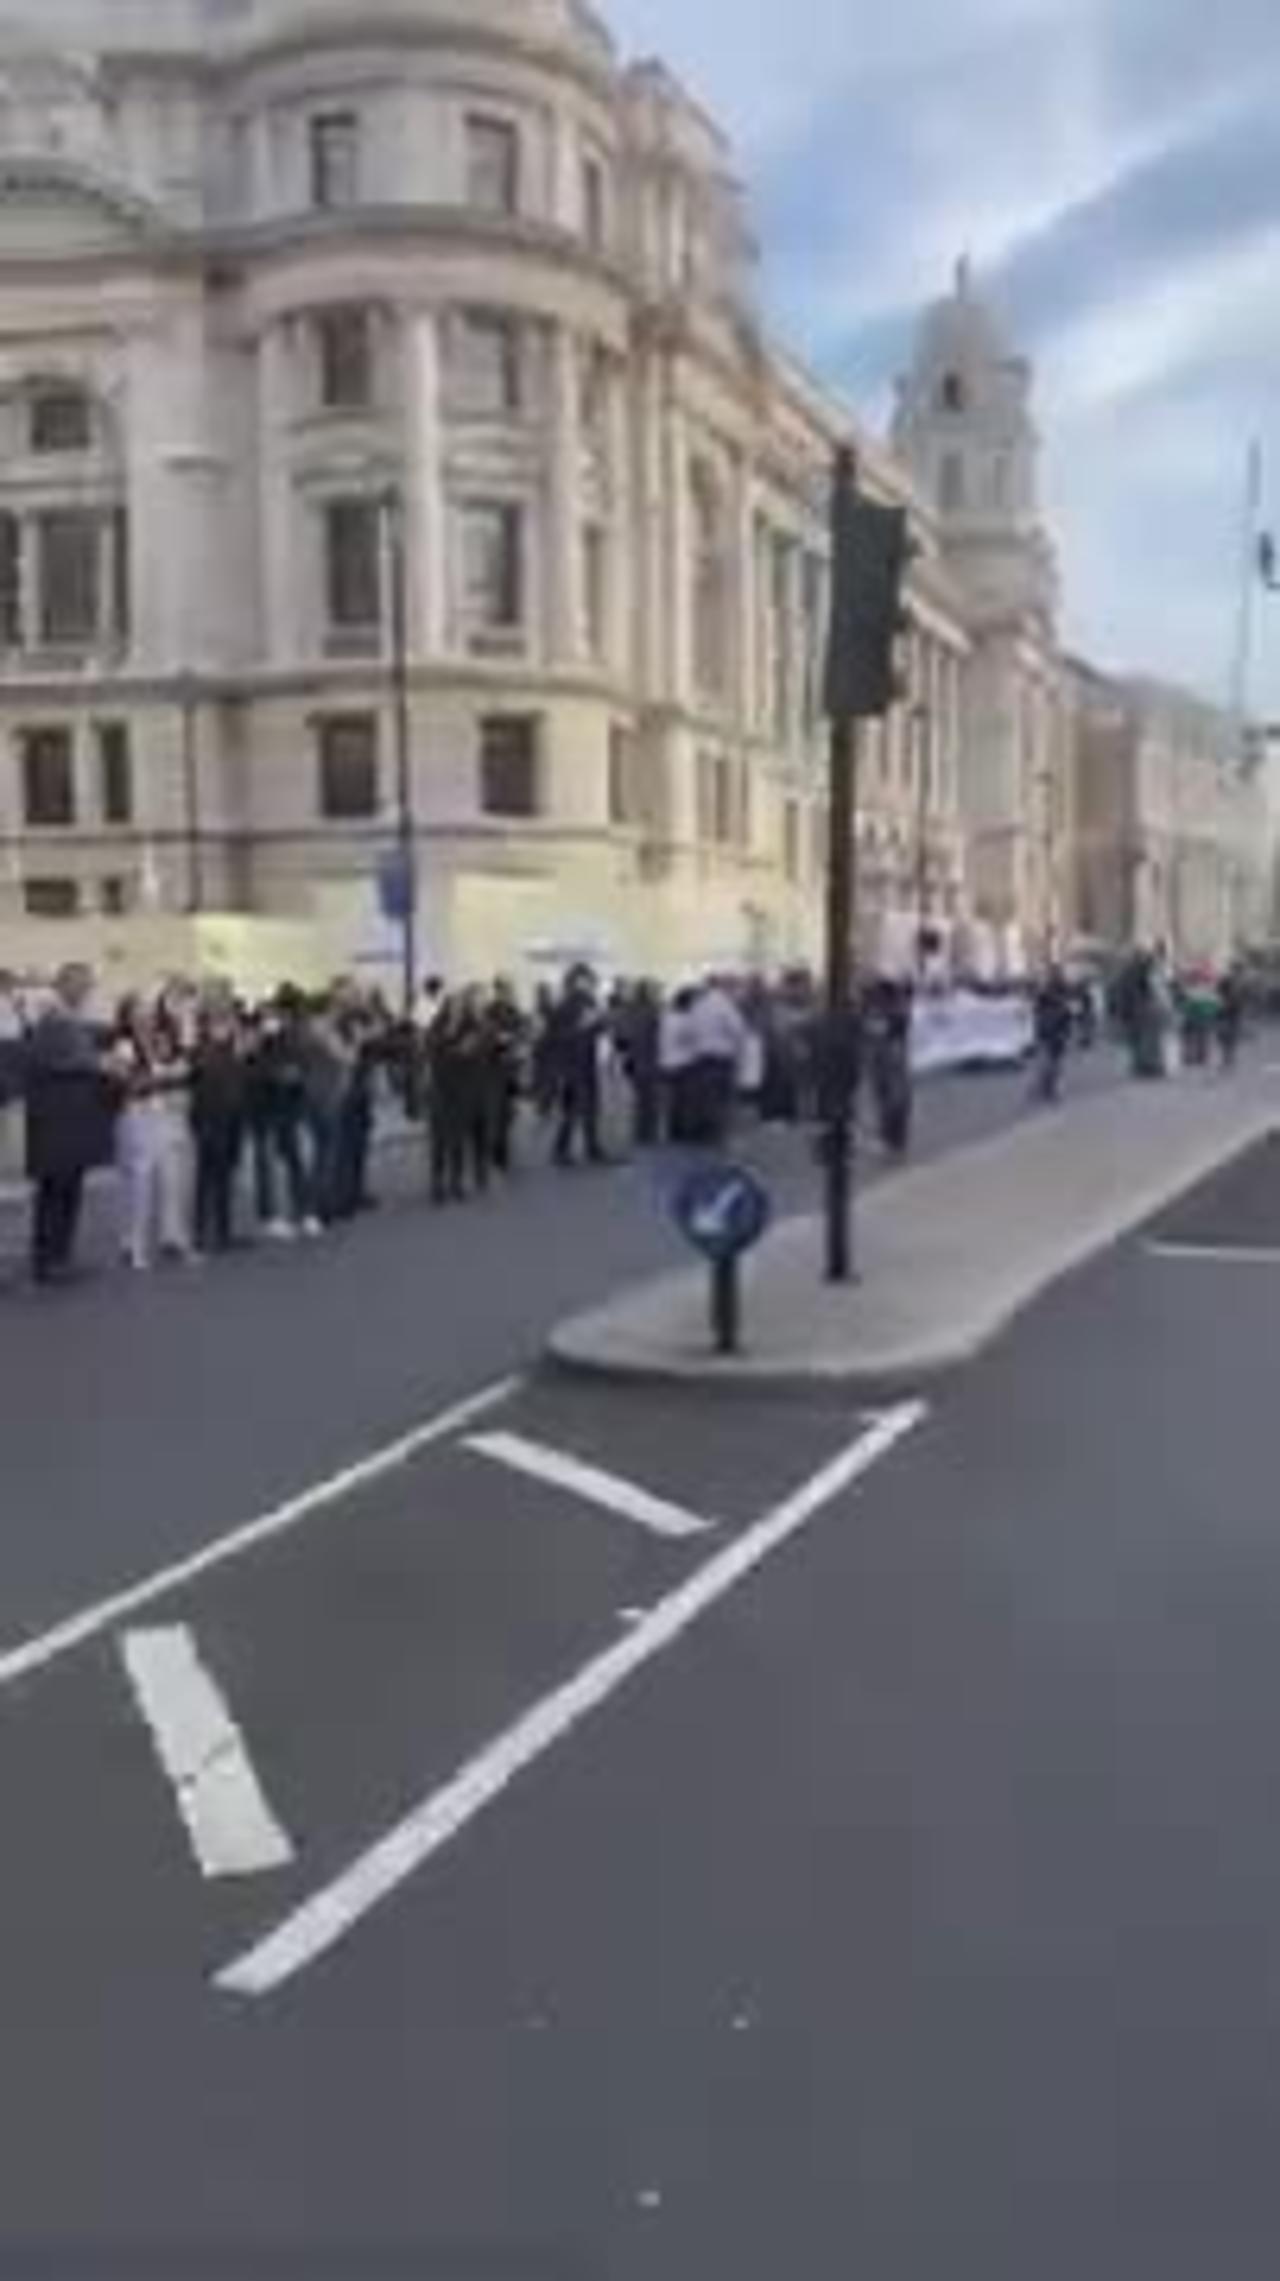 London protesters form human chain in support of women's rights in Iran